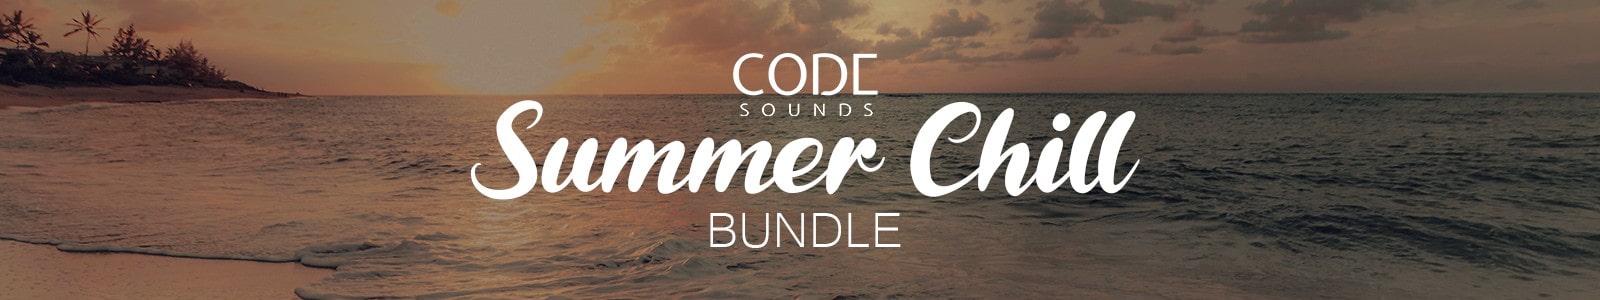 Summer Chill Bundle by Code Sounds